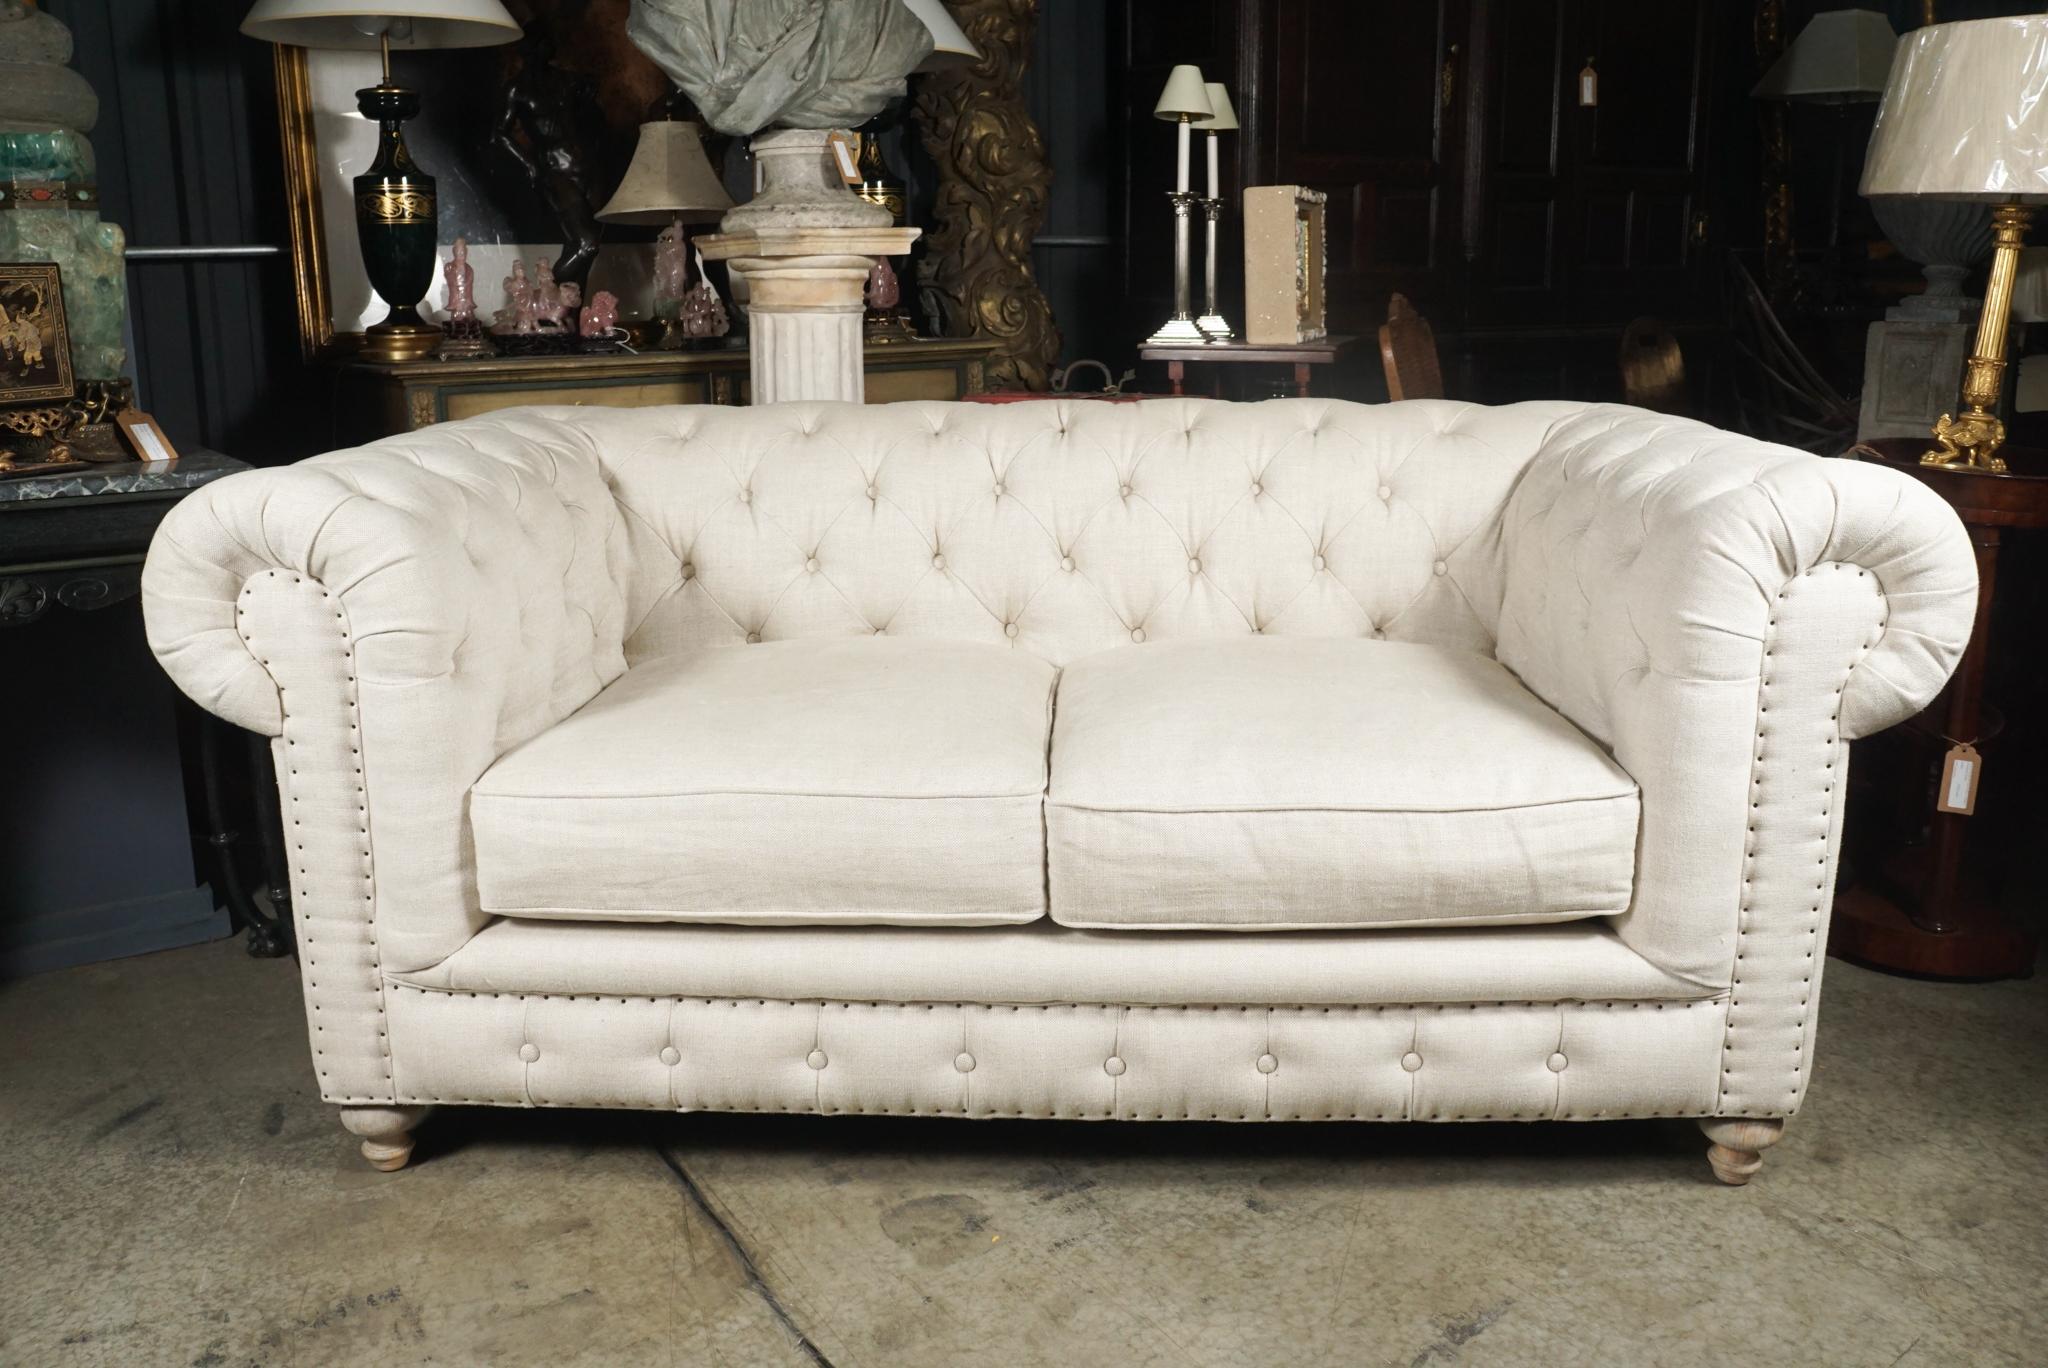 Vintage Edwardian Style Linen Upholstered Button Tufted Chesterfield Sofa For Sale 1